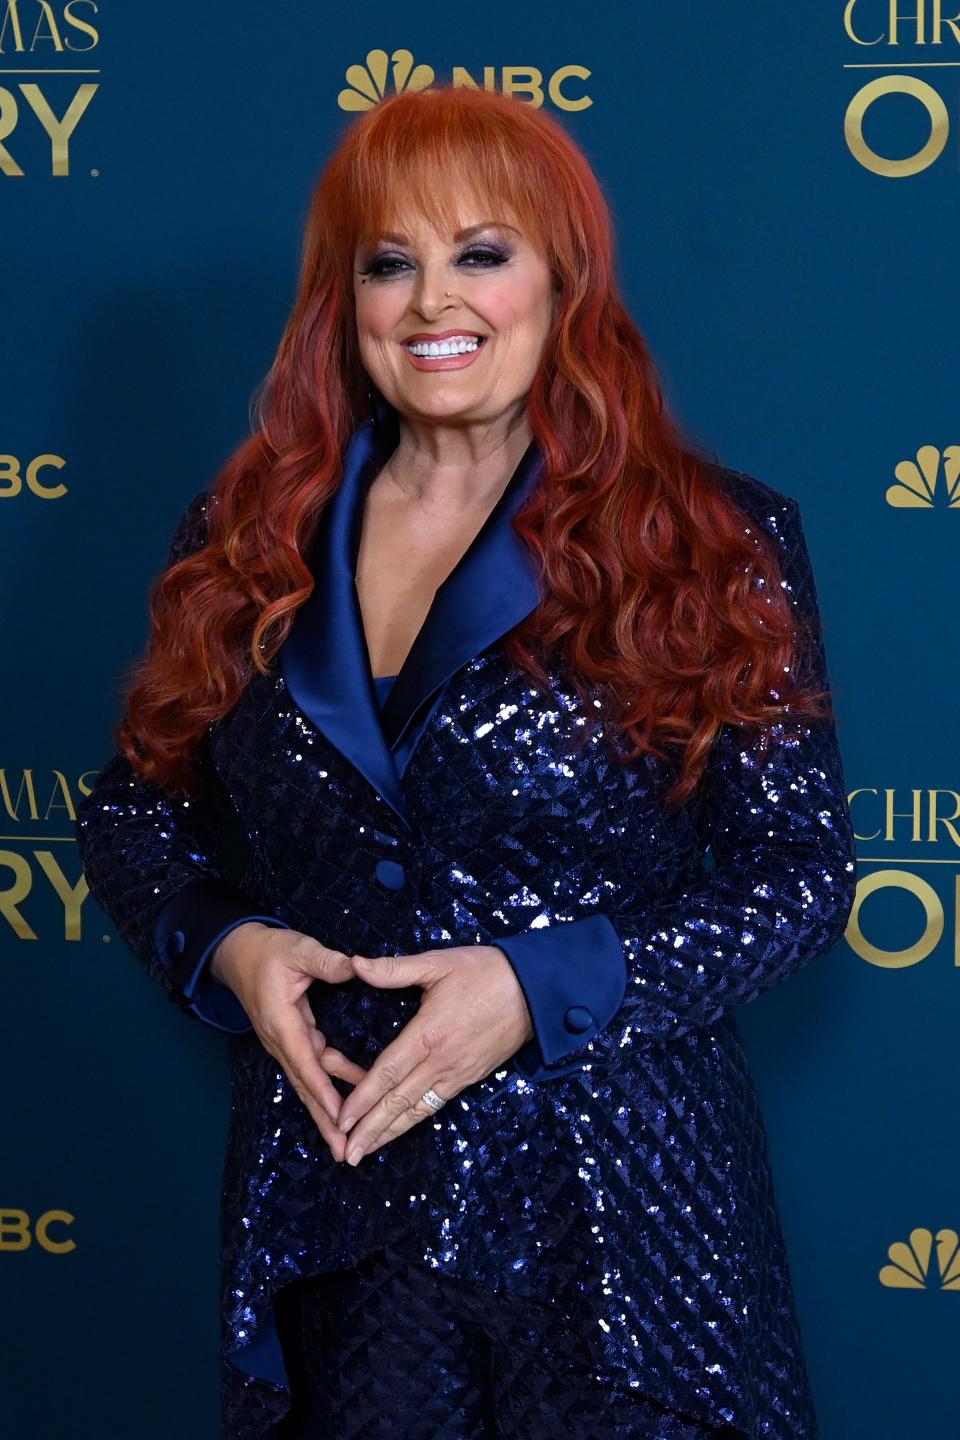 Wynonna Judd attends attends the country music special, “Christmas at the Opry,” at the Grand Ole Opry House on Tuesday, Oct. 3, 2023, in Nashville, Tenn. Grammy award winner Wynonna Judd hosted the pre-taped two-hour event, which airs on NBC Dec. 7.